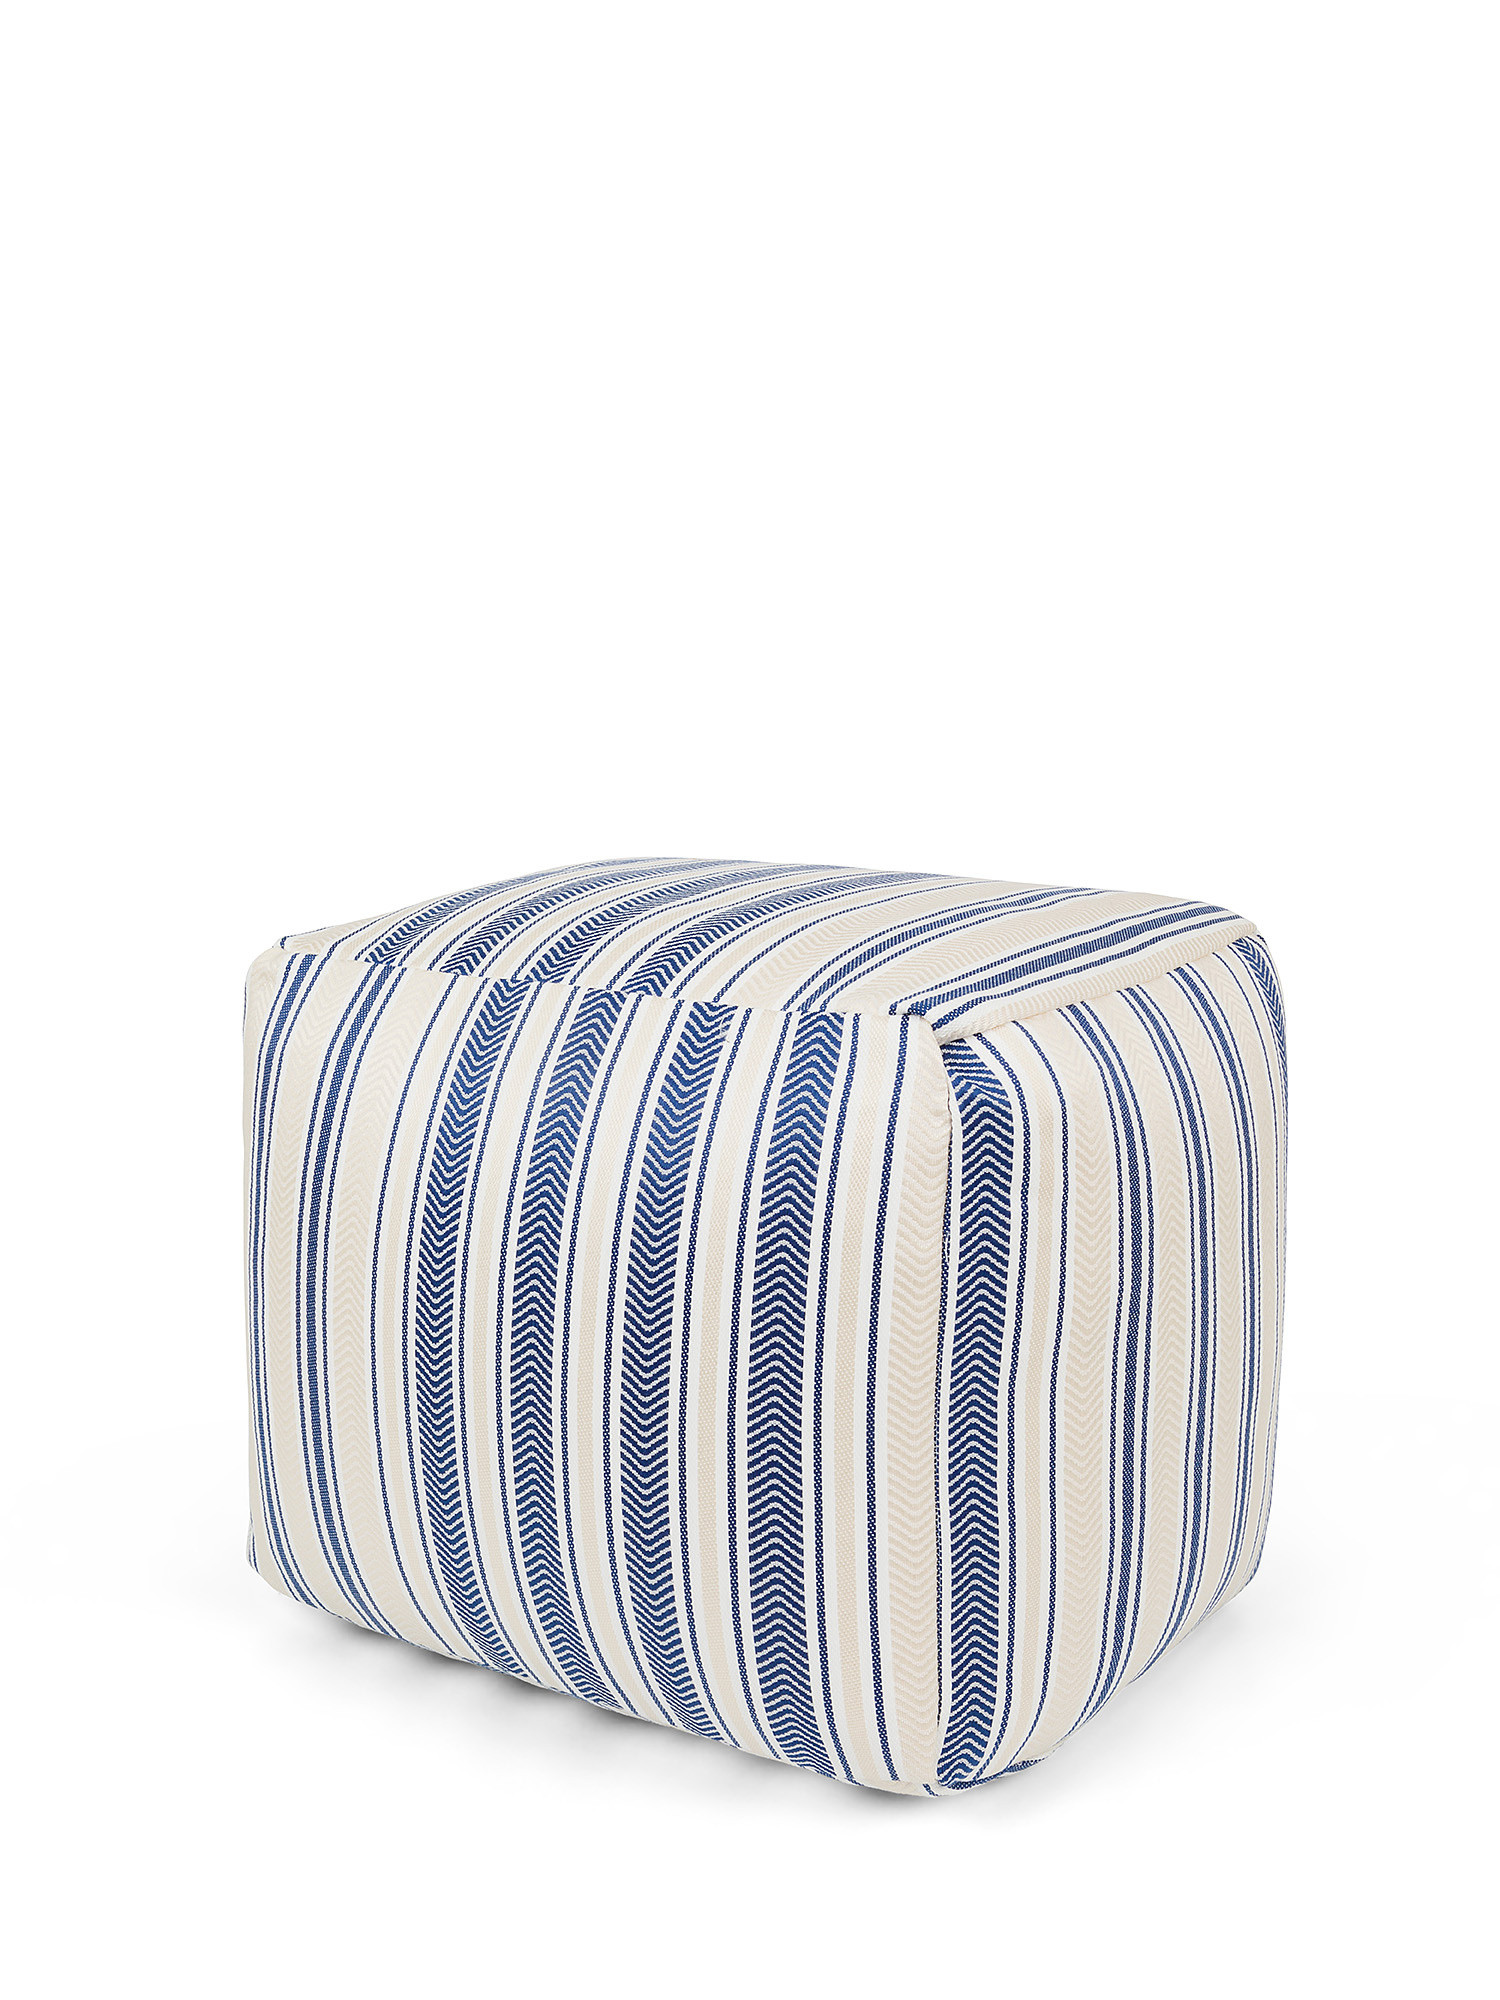 Striped patterned outdoor pouf, with zip and padding., Beige, large image number 0